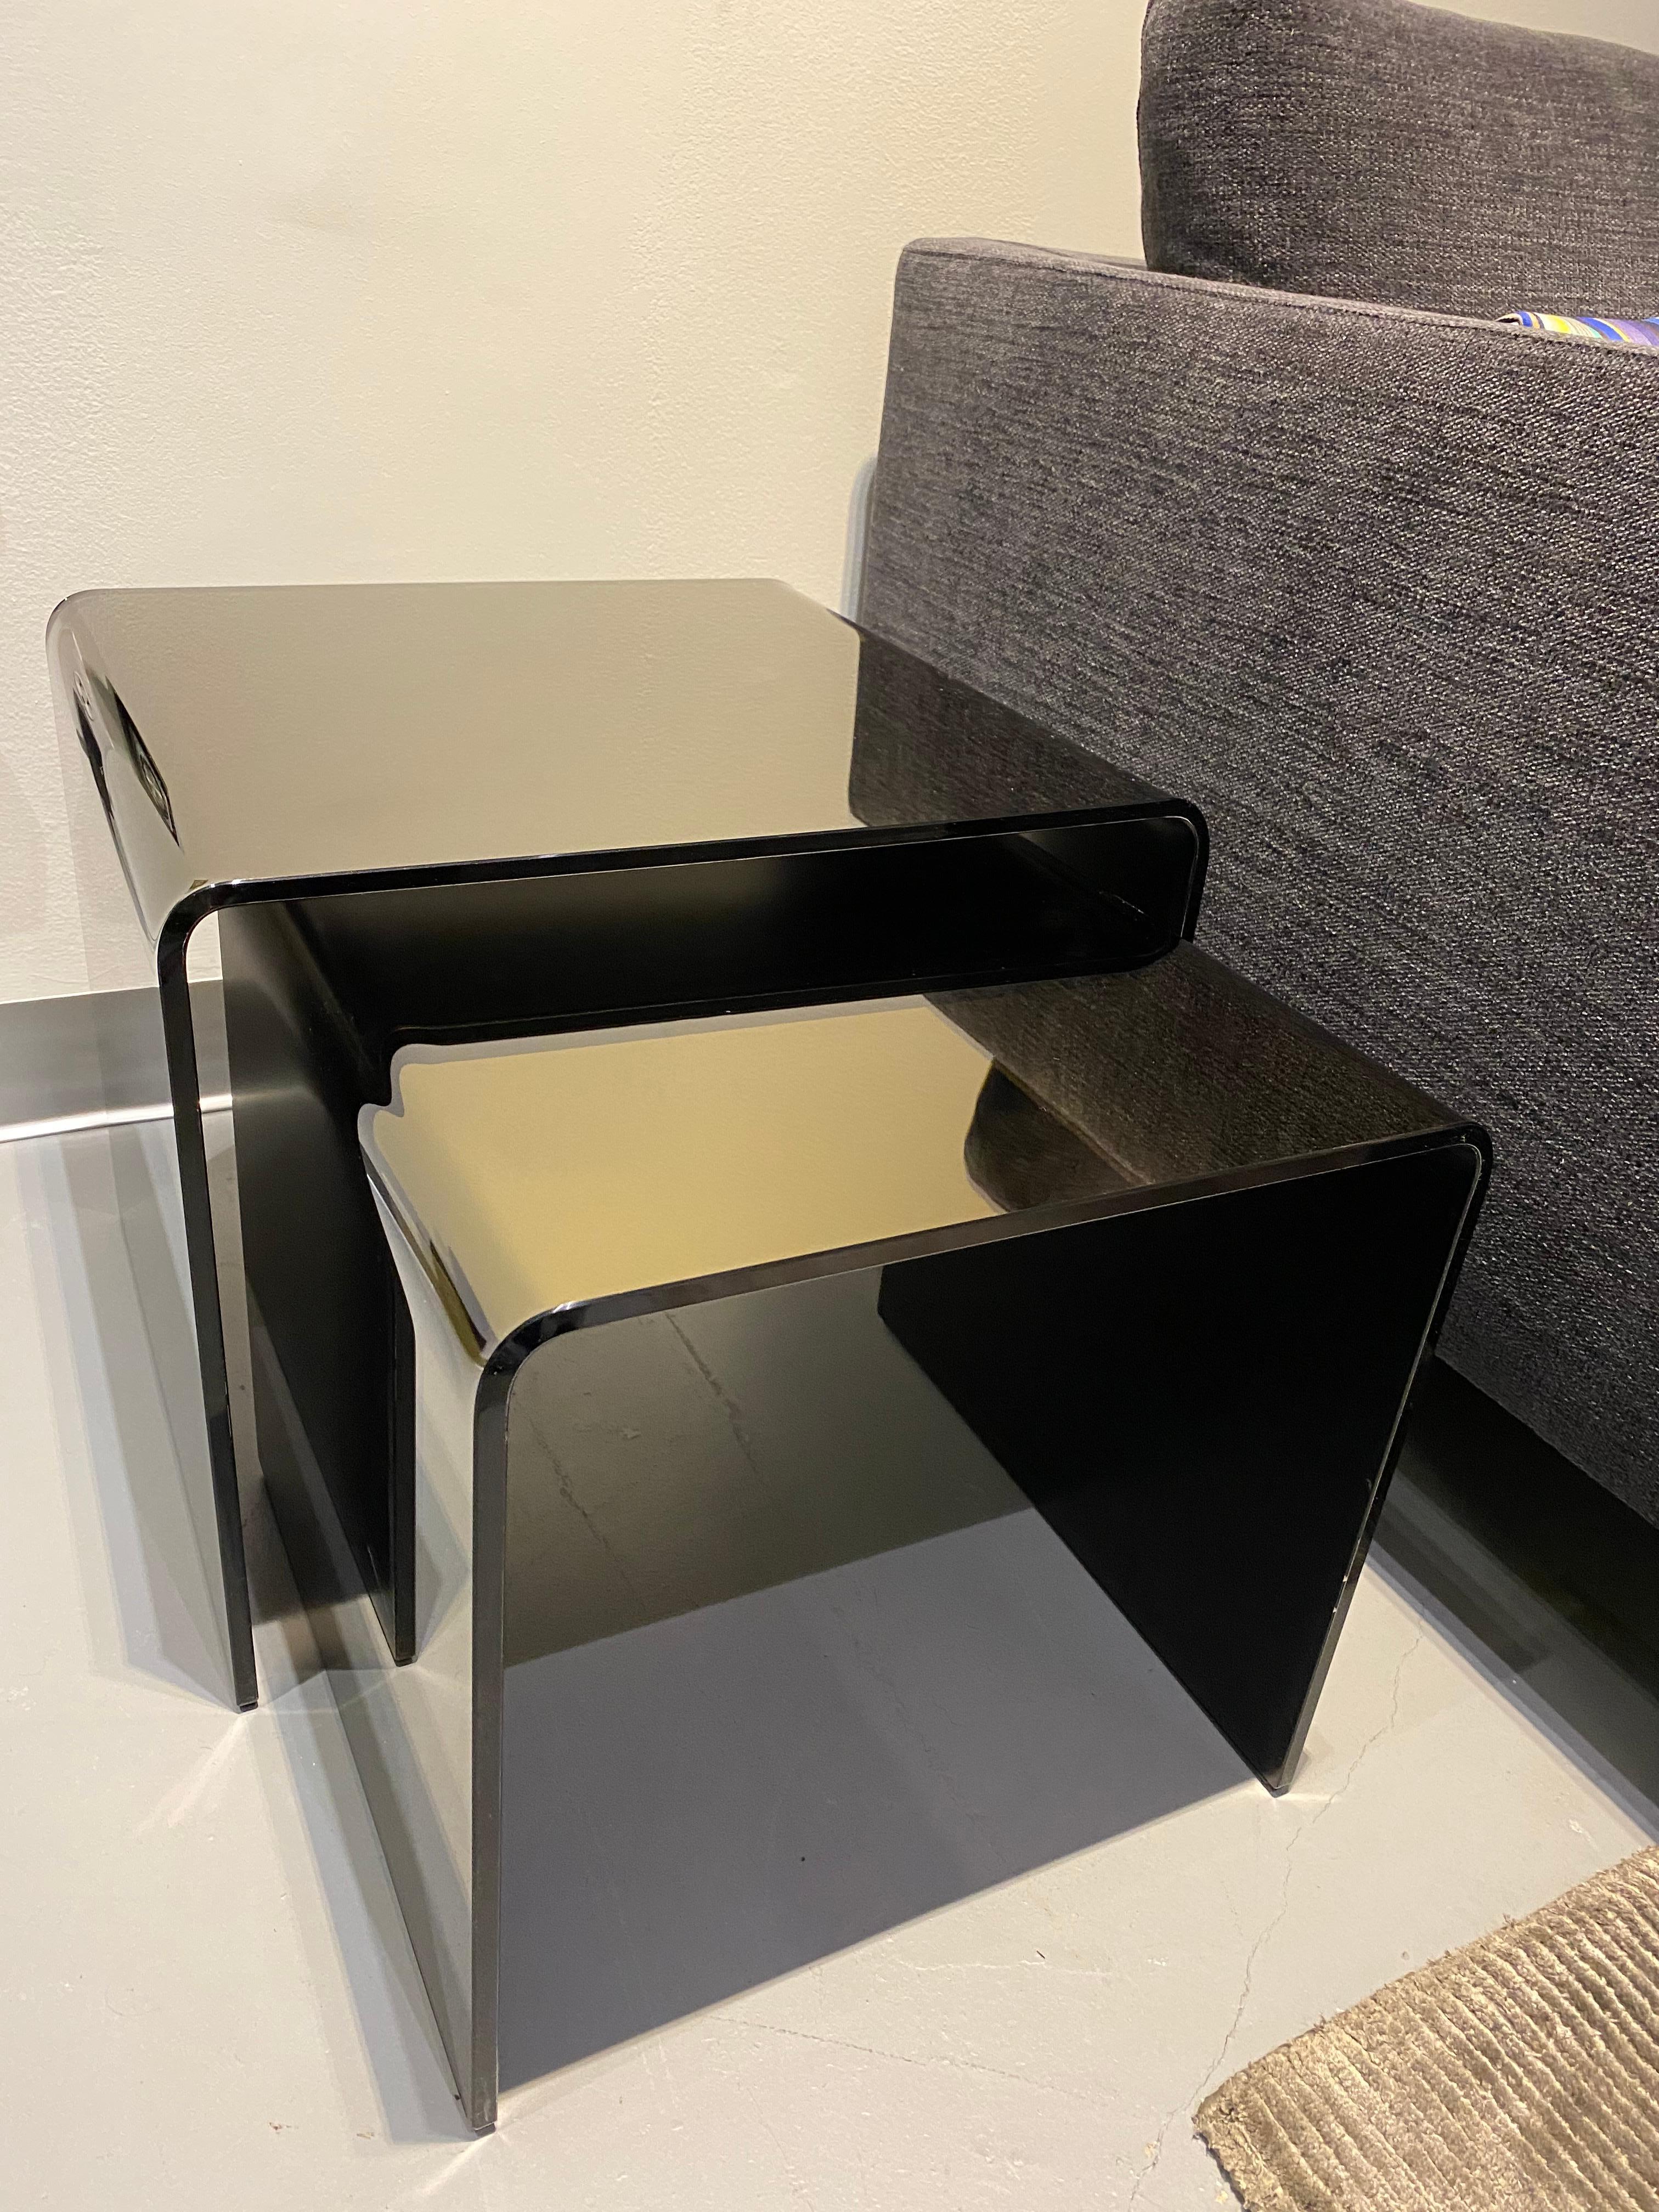 RIALTO TRIS Bronze
Set of coffee tables in 10 mm-thick curved glass. 
0301/1BR
40x40x38 
0301/2BR 
48x45x42

